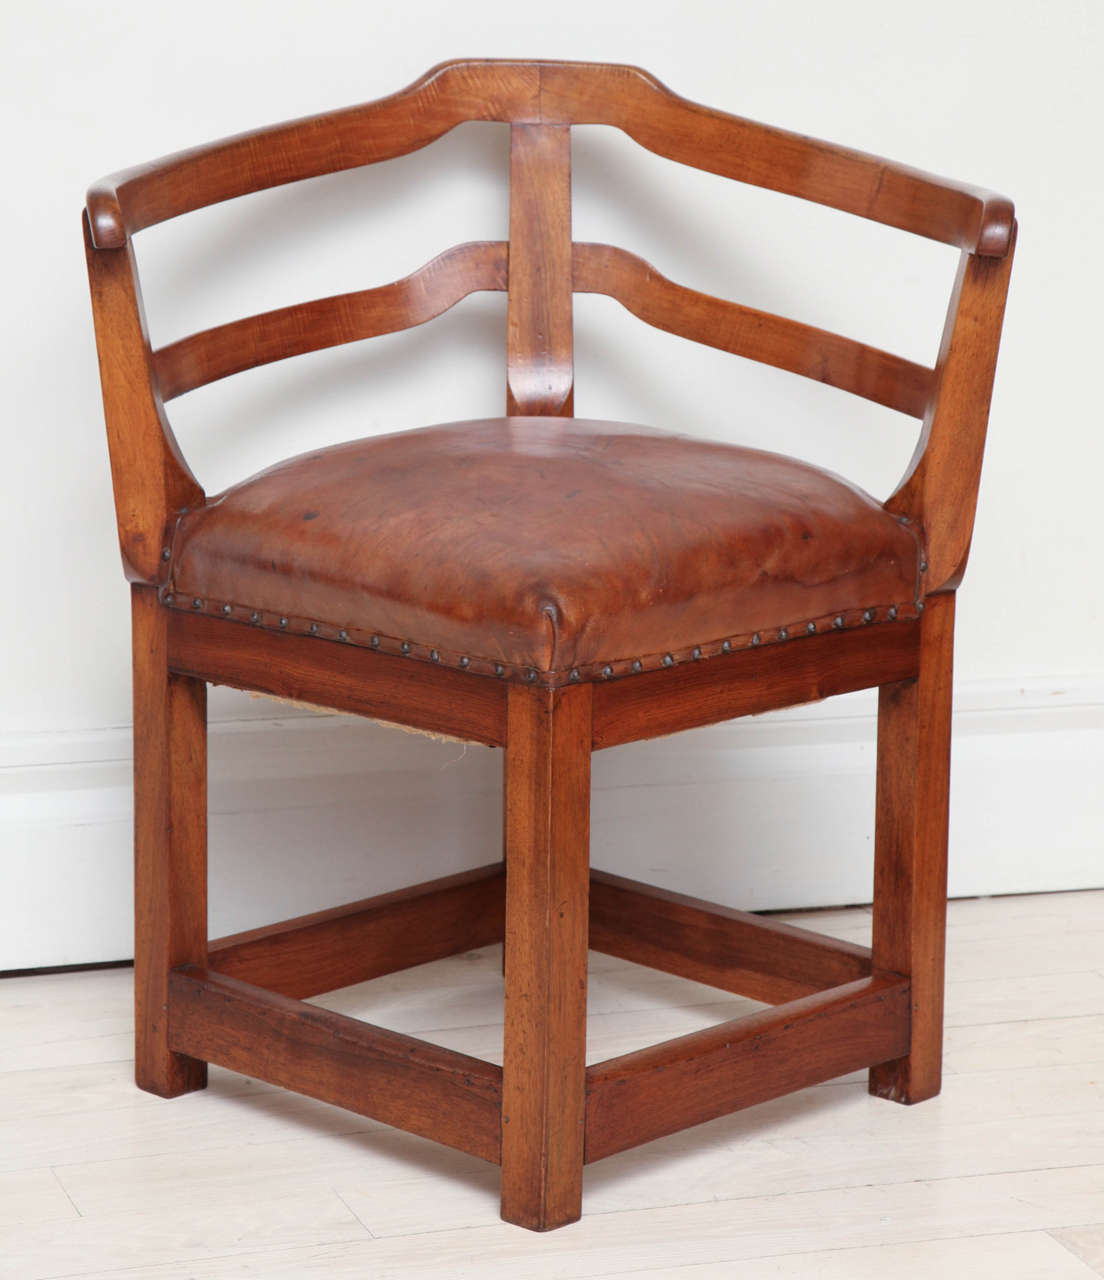 Early 1800's walnut corner chair with slat back and original brown leather seat.